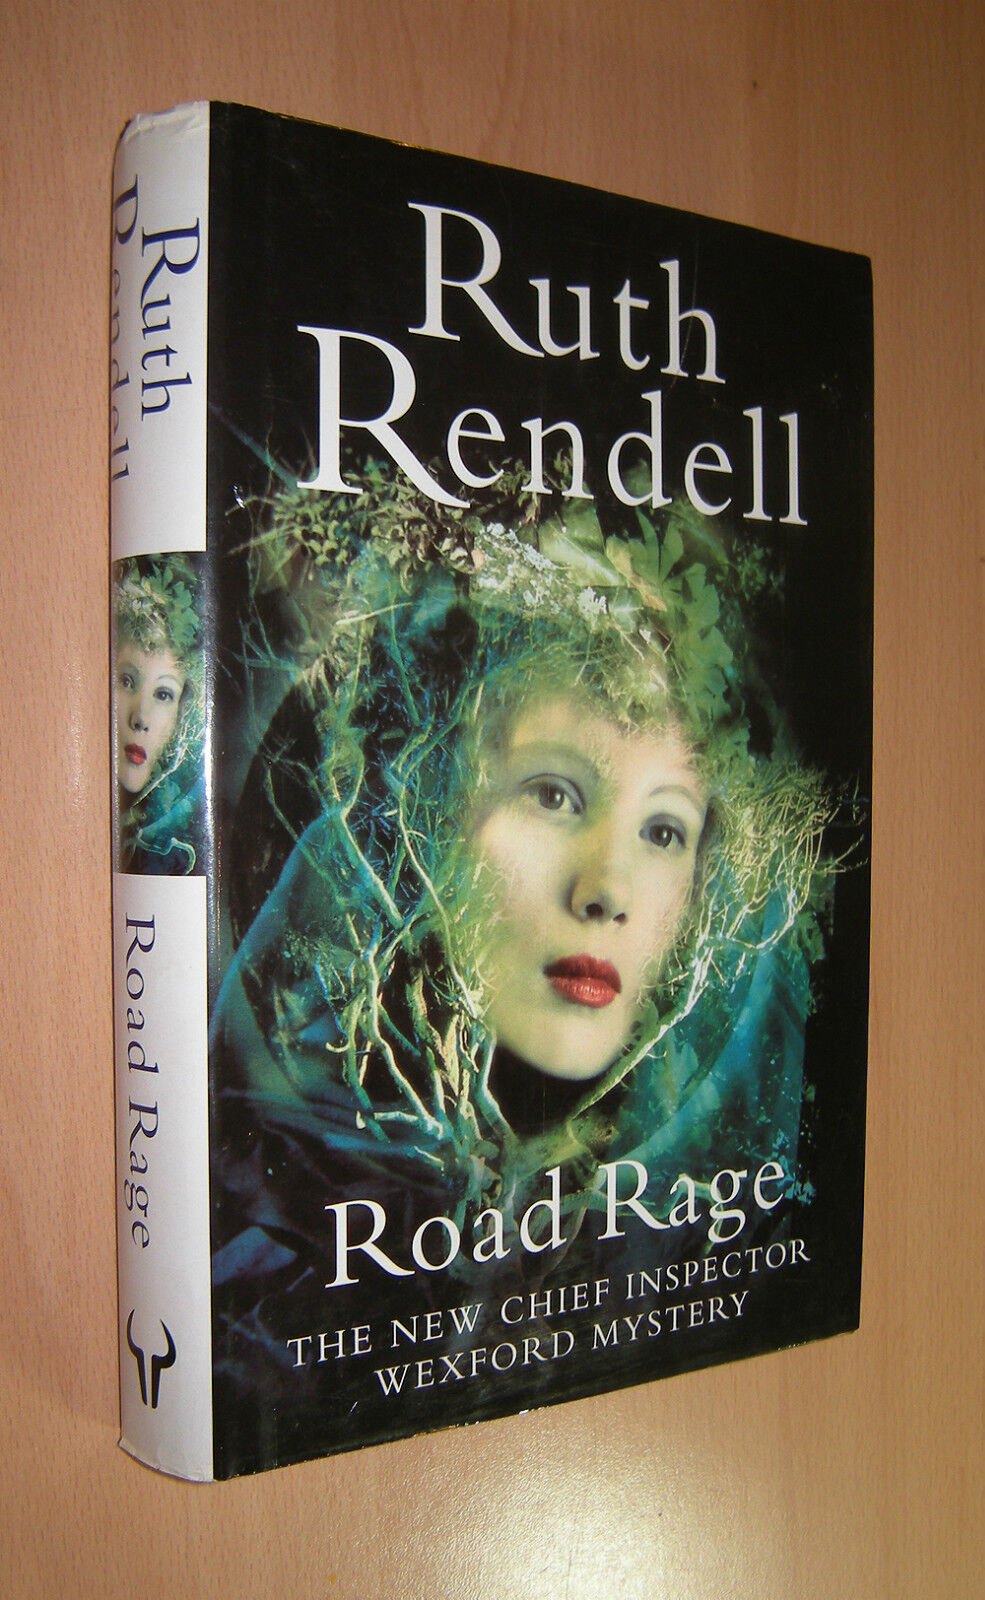 Ruth Rendell - Road Rage - SIGNED First Edition / Crime Fiction / HB in DW 1997